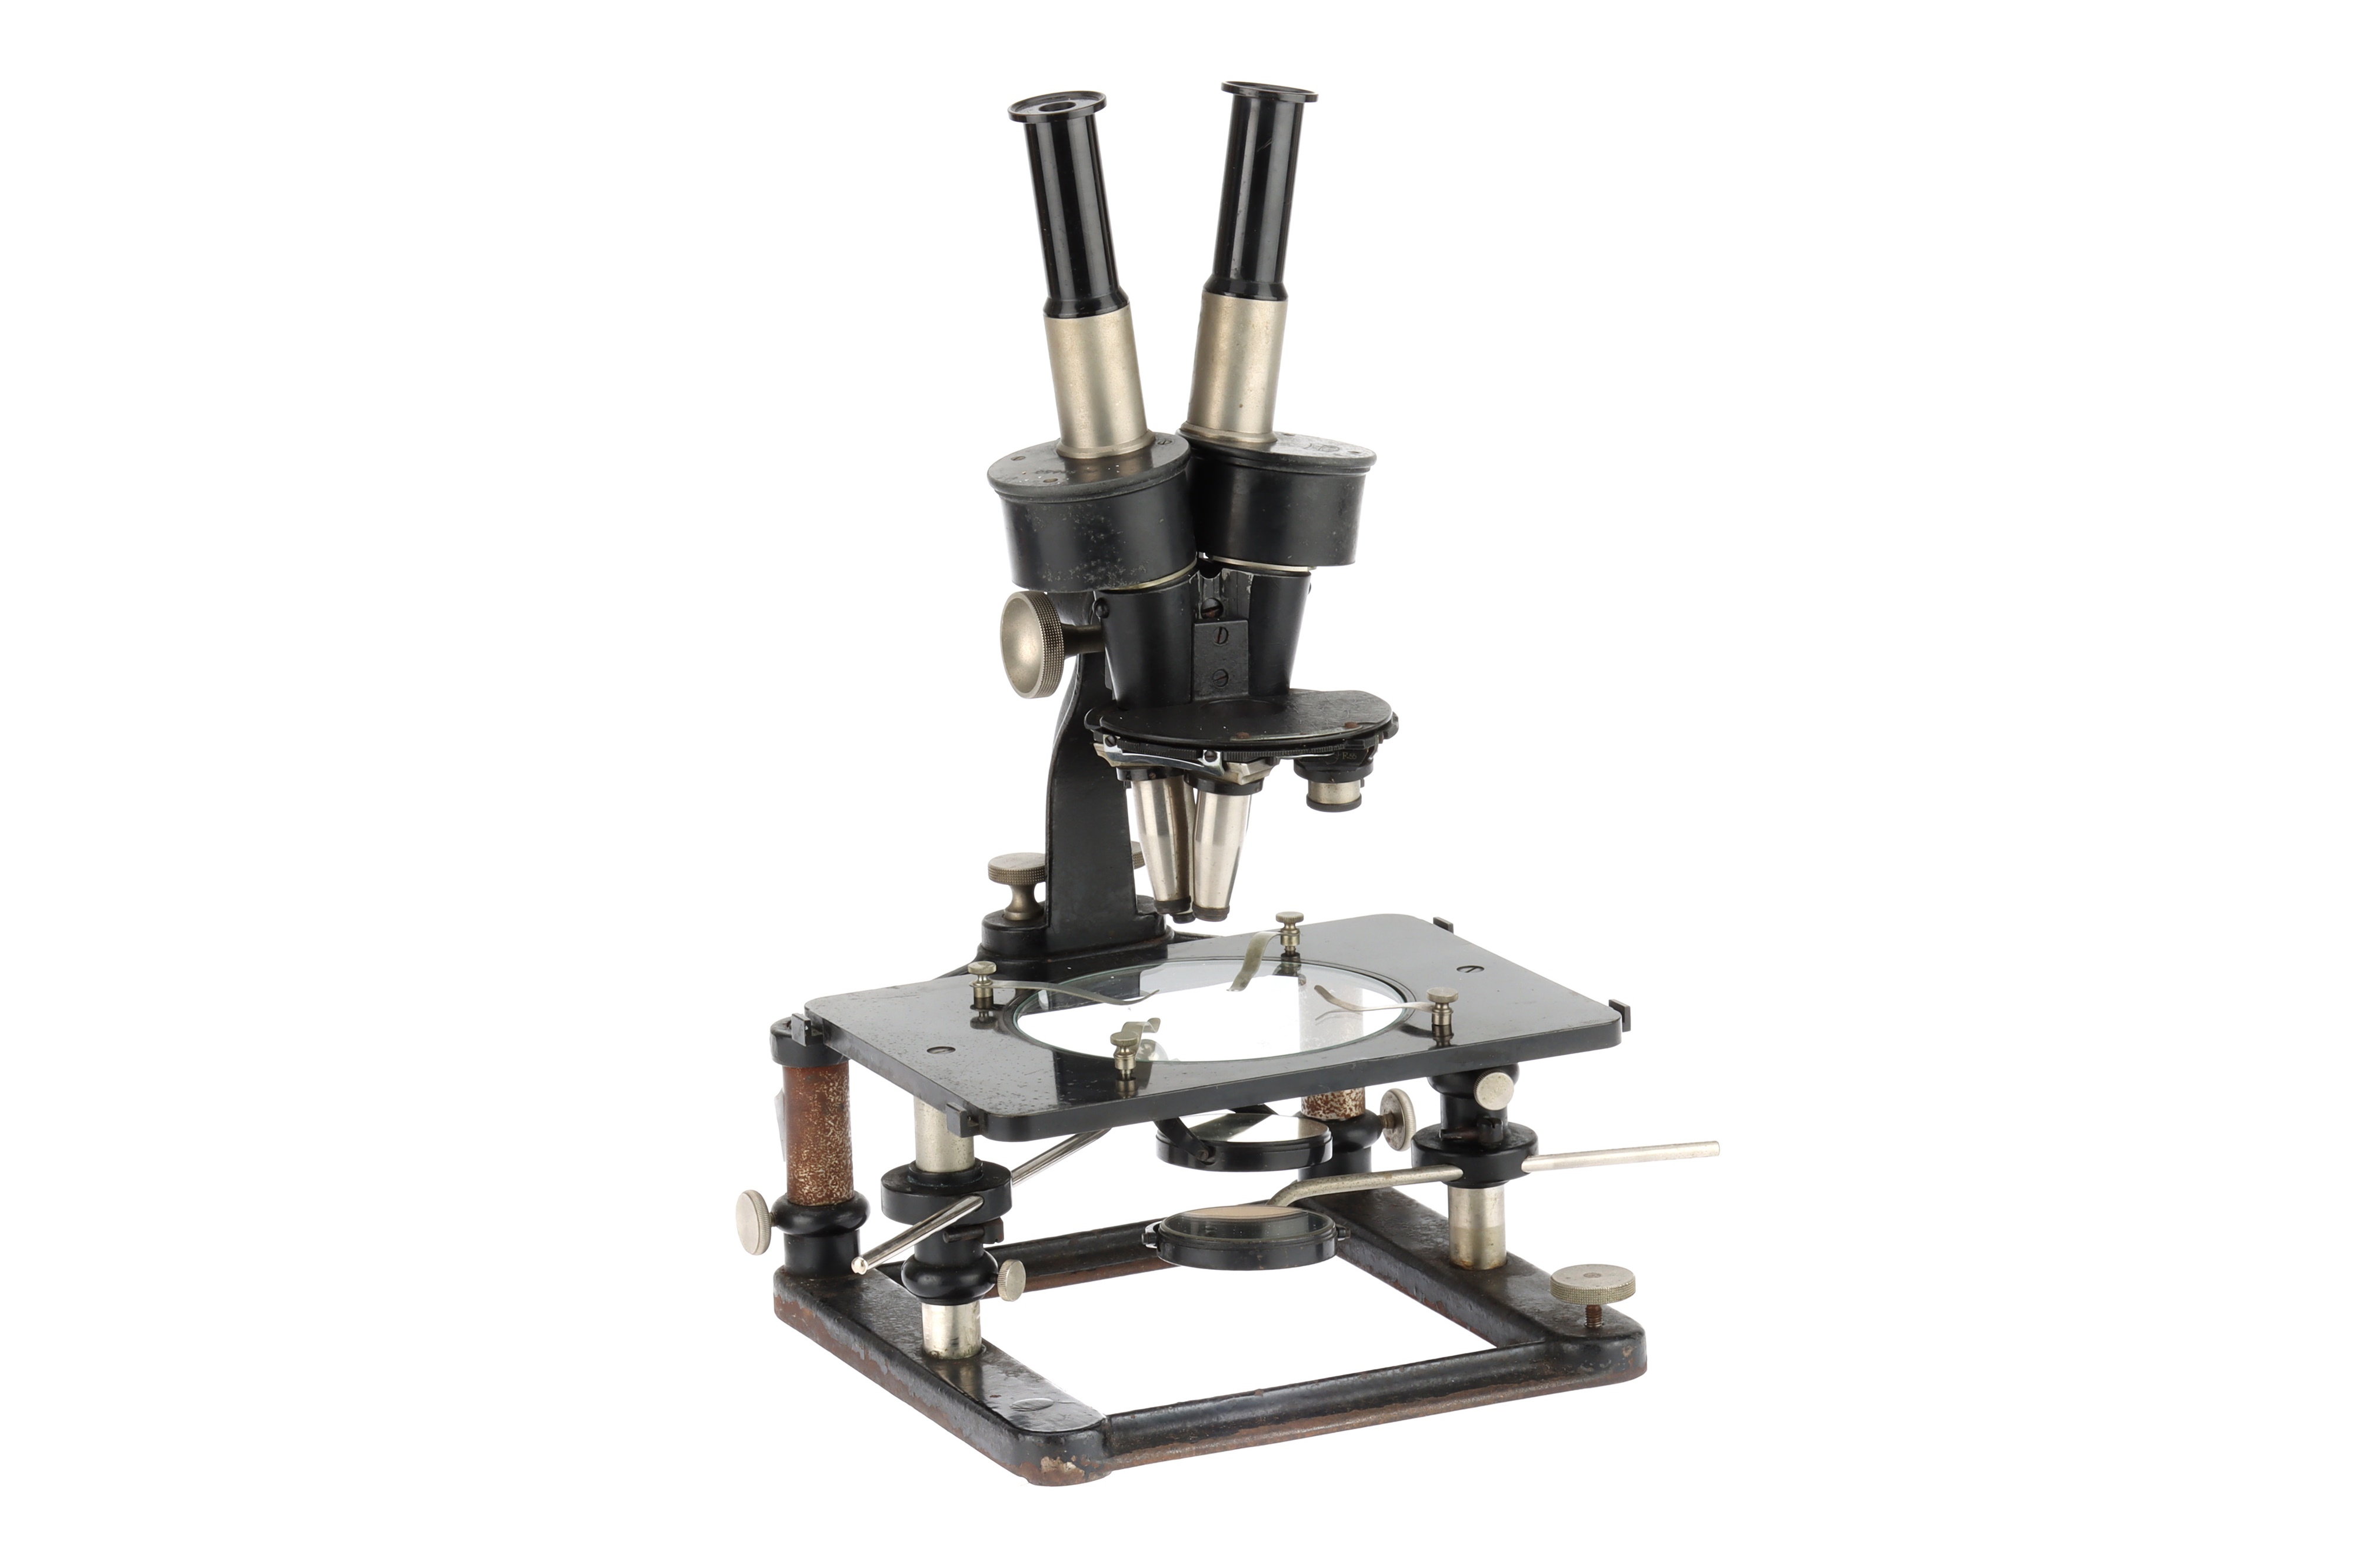 Greenough Binocular Dissecting Microscope By Zeiss.